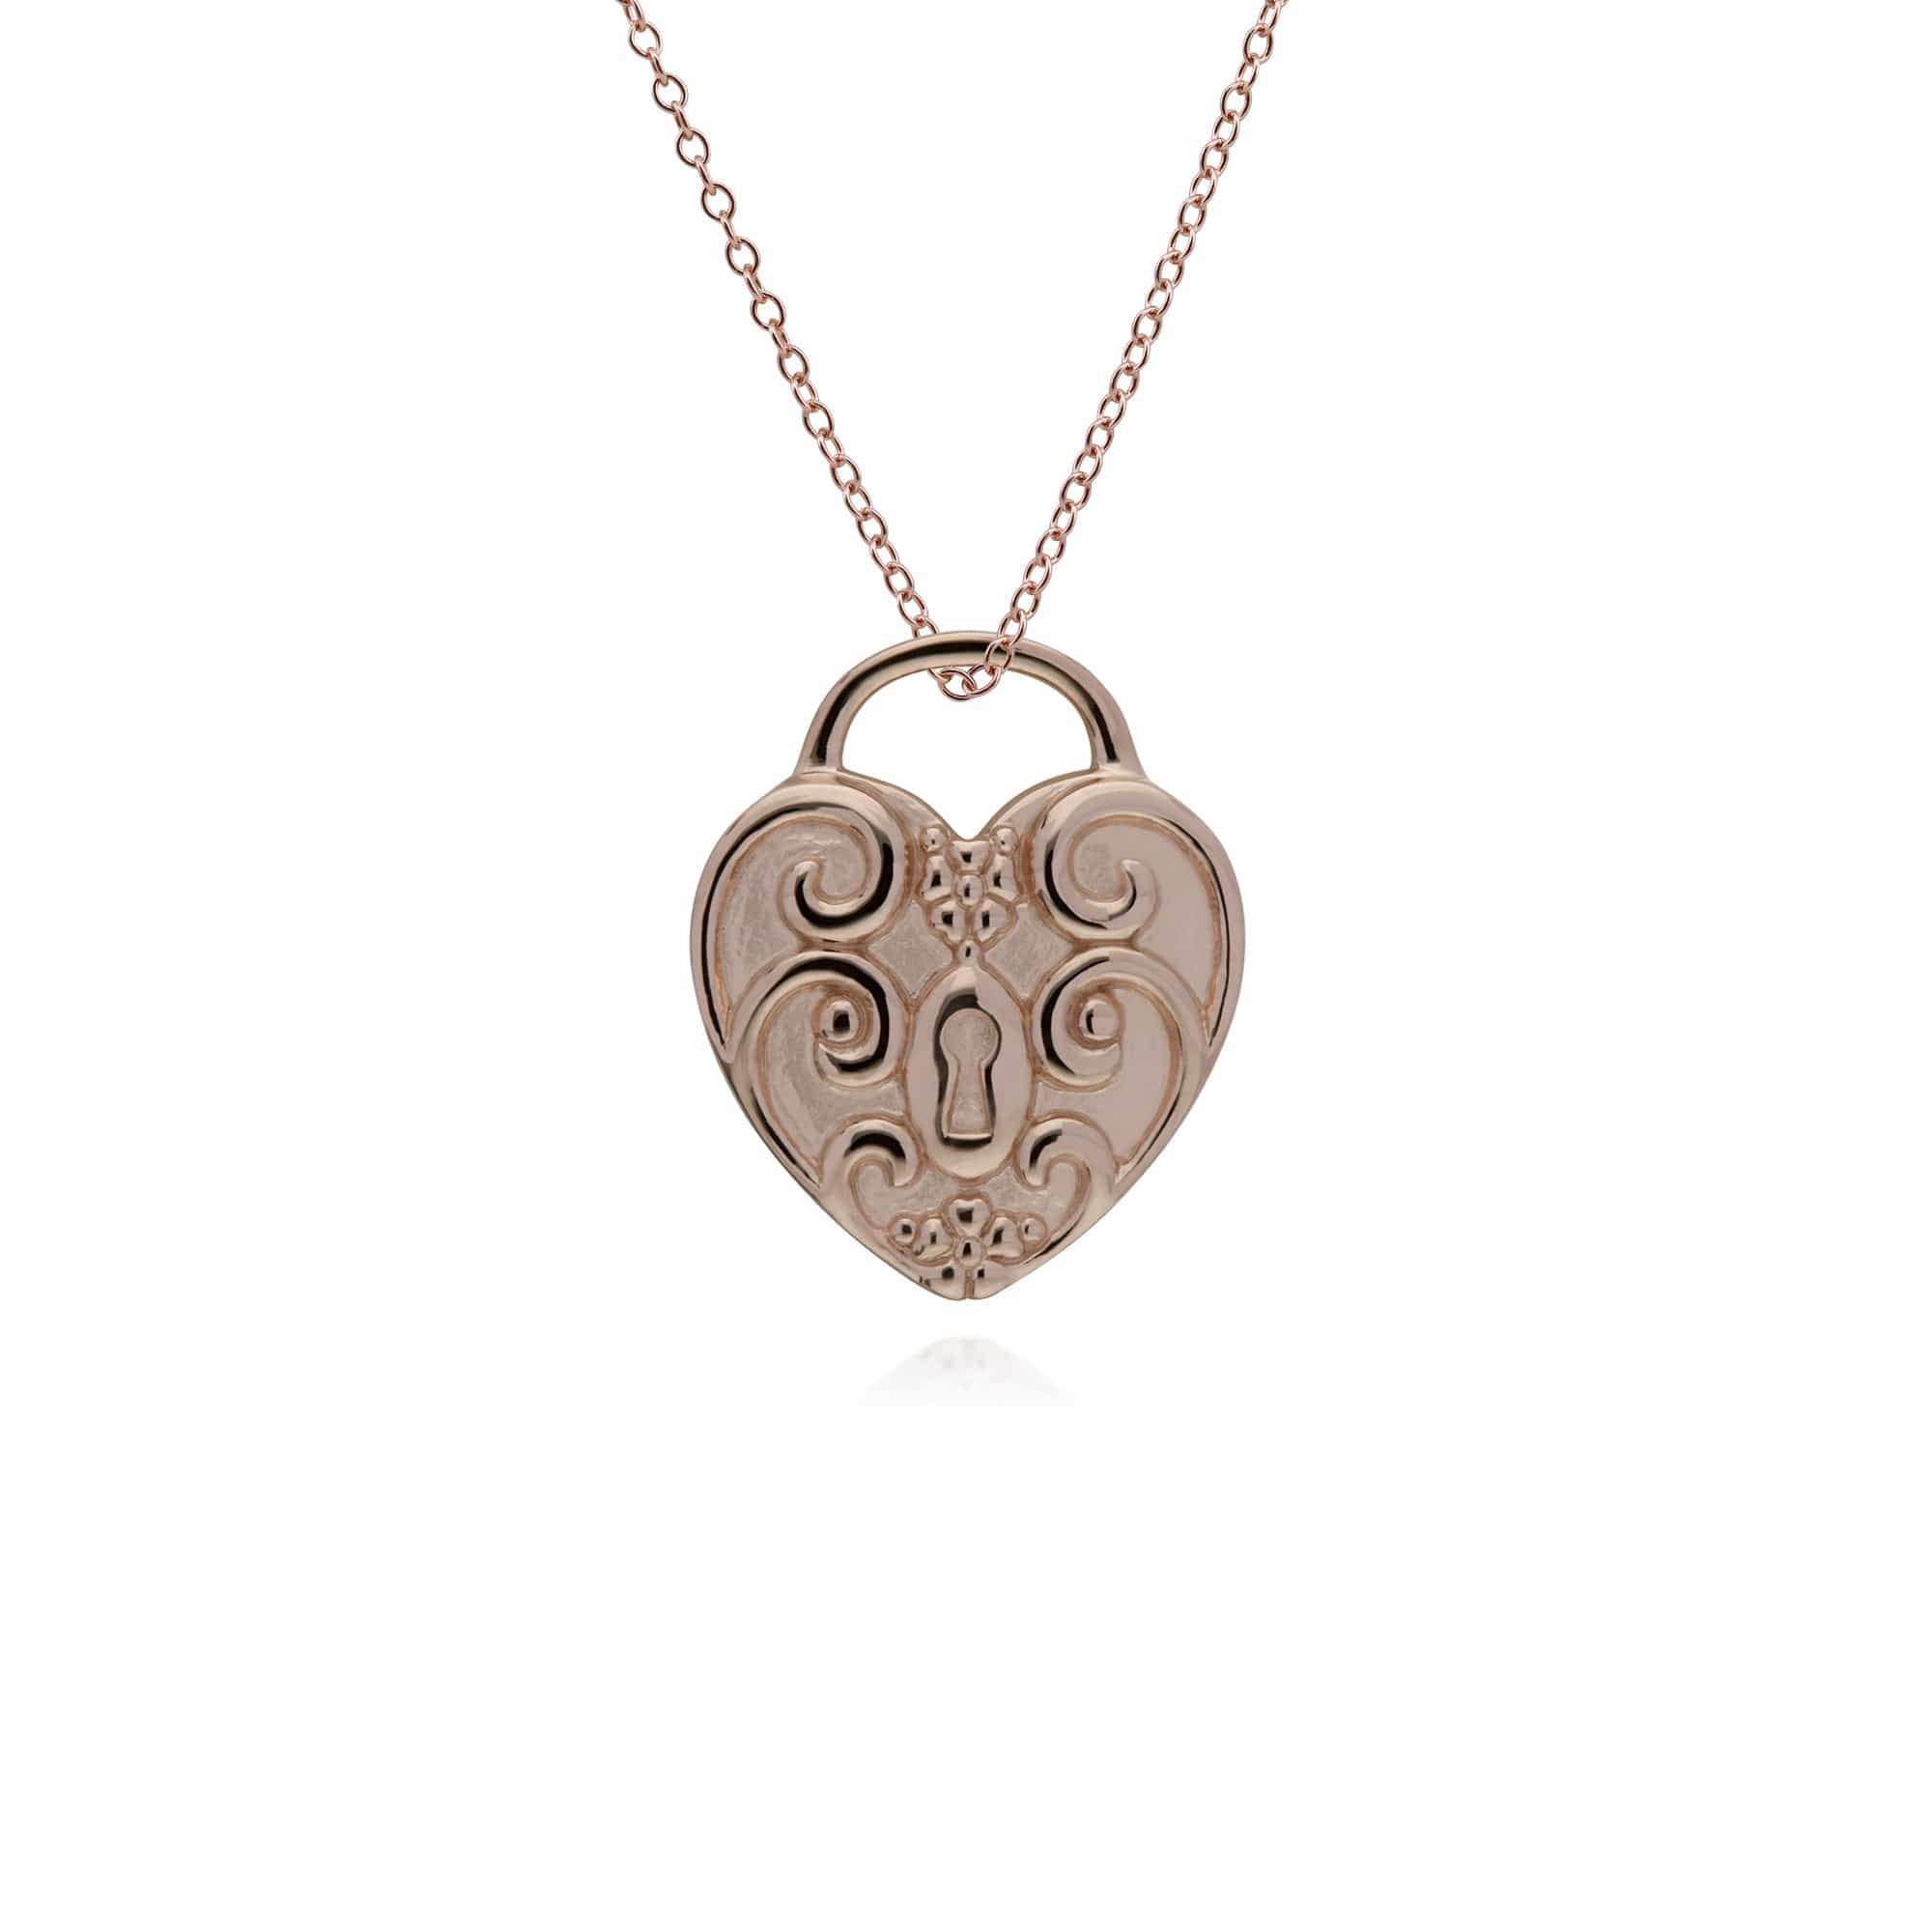 270P026301925-270P026501925 Classic Swirl Heart Lock Pendant & Ruby Key Charm in Rose Gold Plated 925 Sterling Silver 3